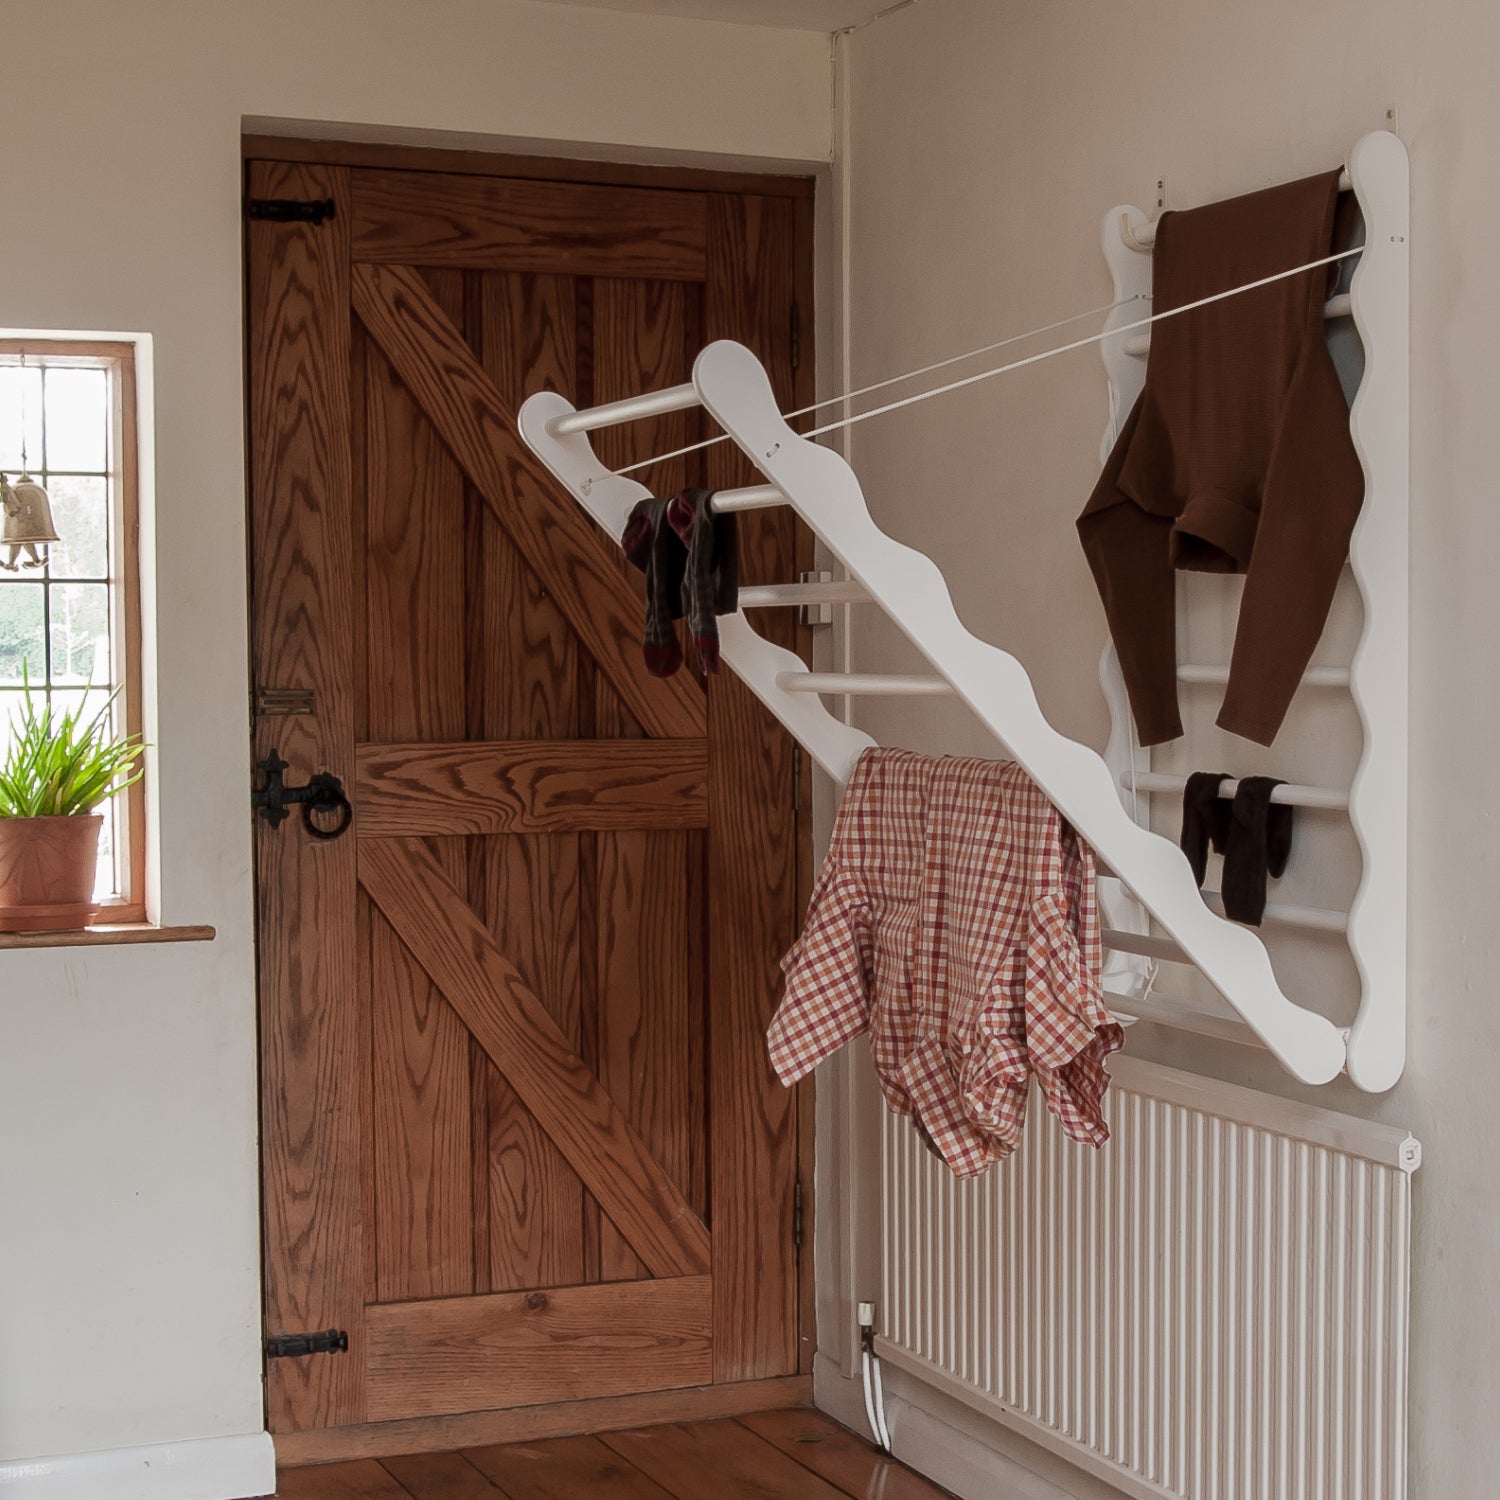 Slightly open wooden clothes drying rack. Designed and made by Julu